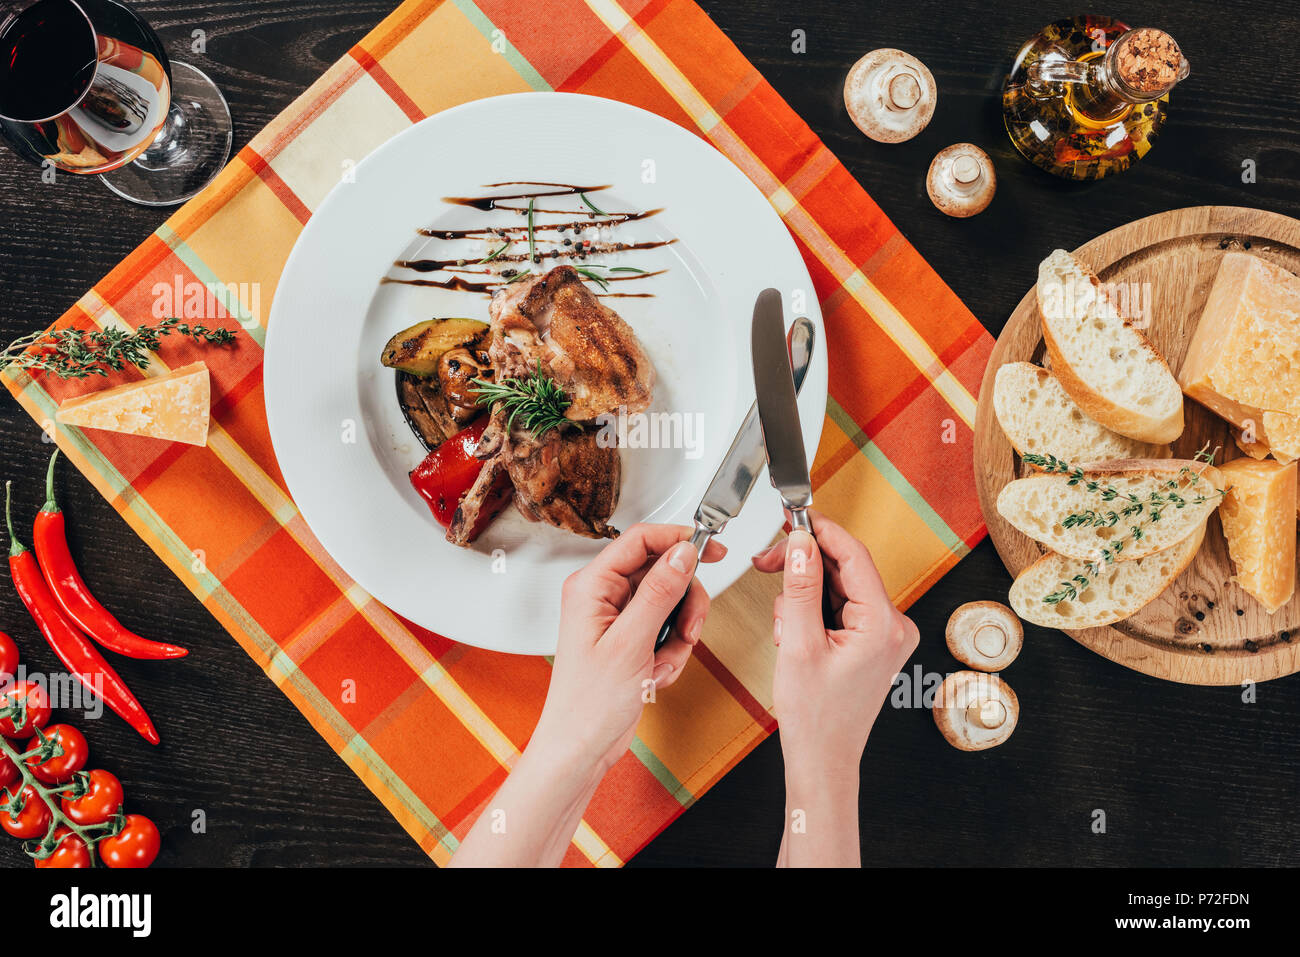 cropped image of woman sharpening knives above grilled chicken Stock Photo